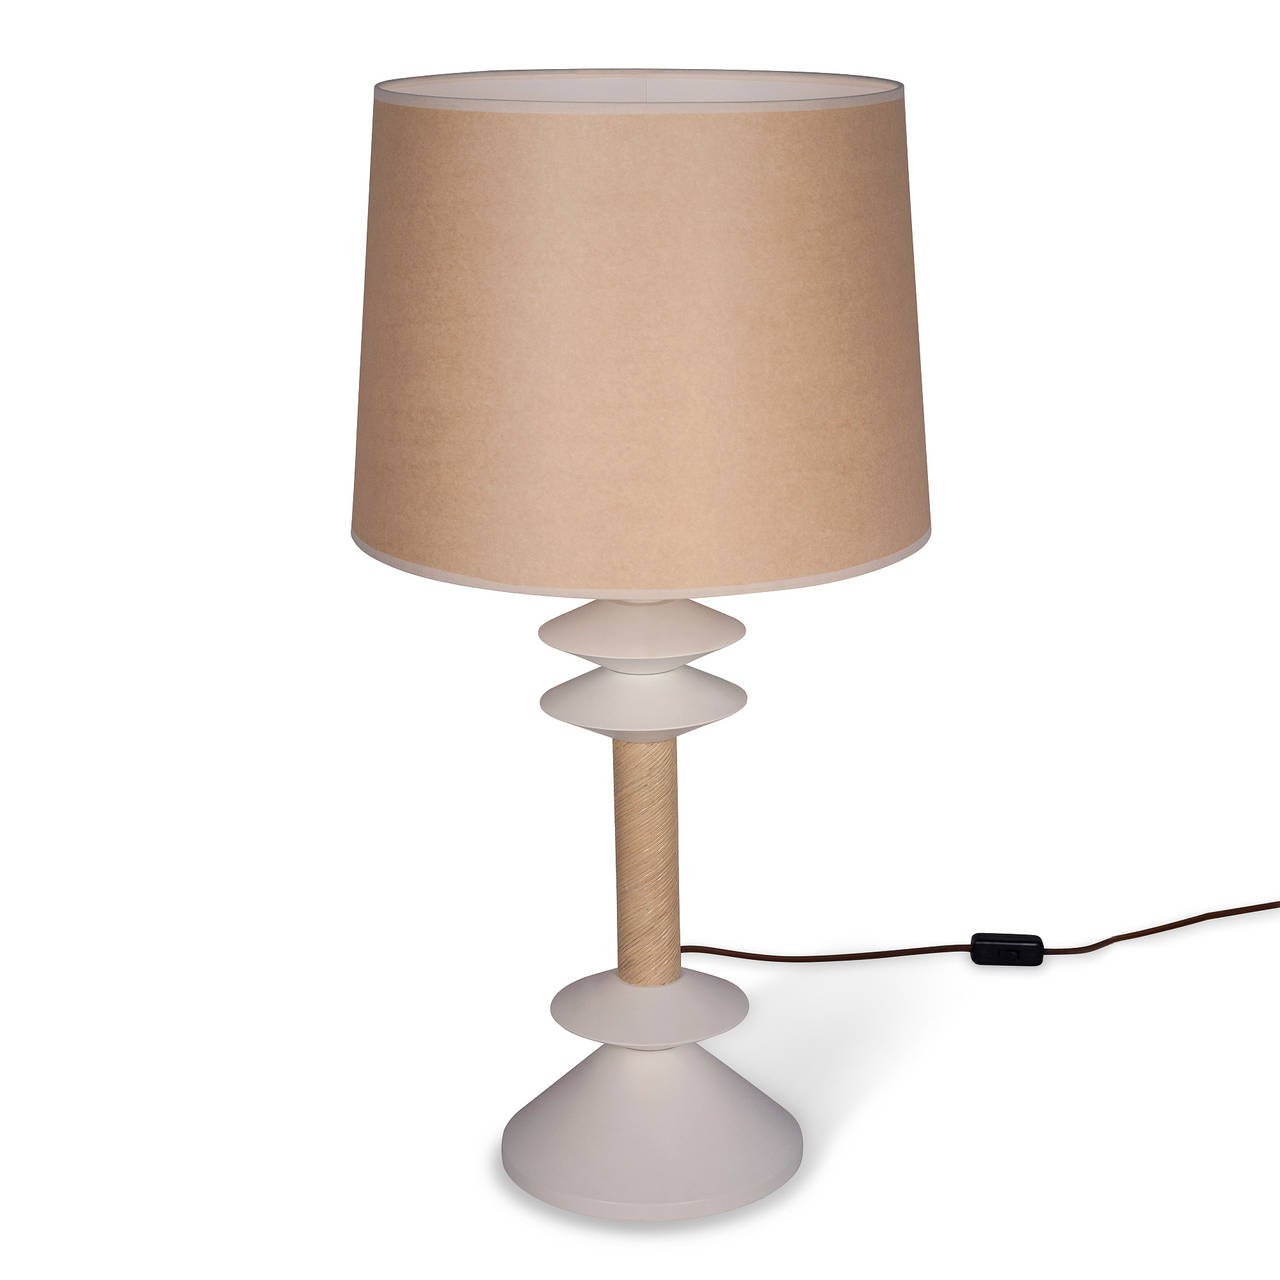 White lacquered steel table lamp, disc shaped elements separated by a reed wrapped middle column section. Designed by Jay Spectre for Paul Hanson, circa 1980. Overall height 31 1/2 in, bottom of base 9 in diameter, discs 6 in diameter. Shade